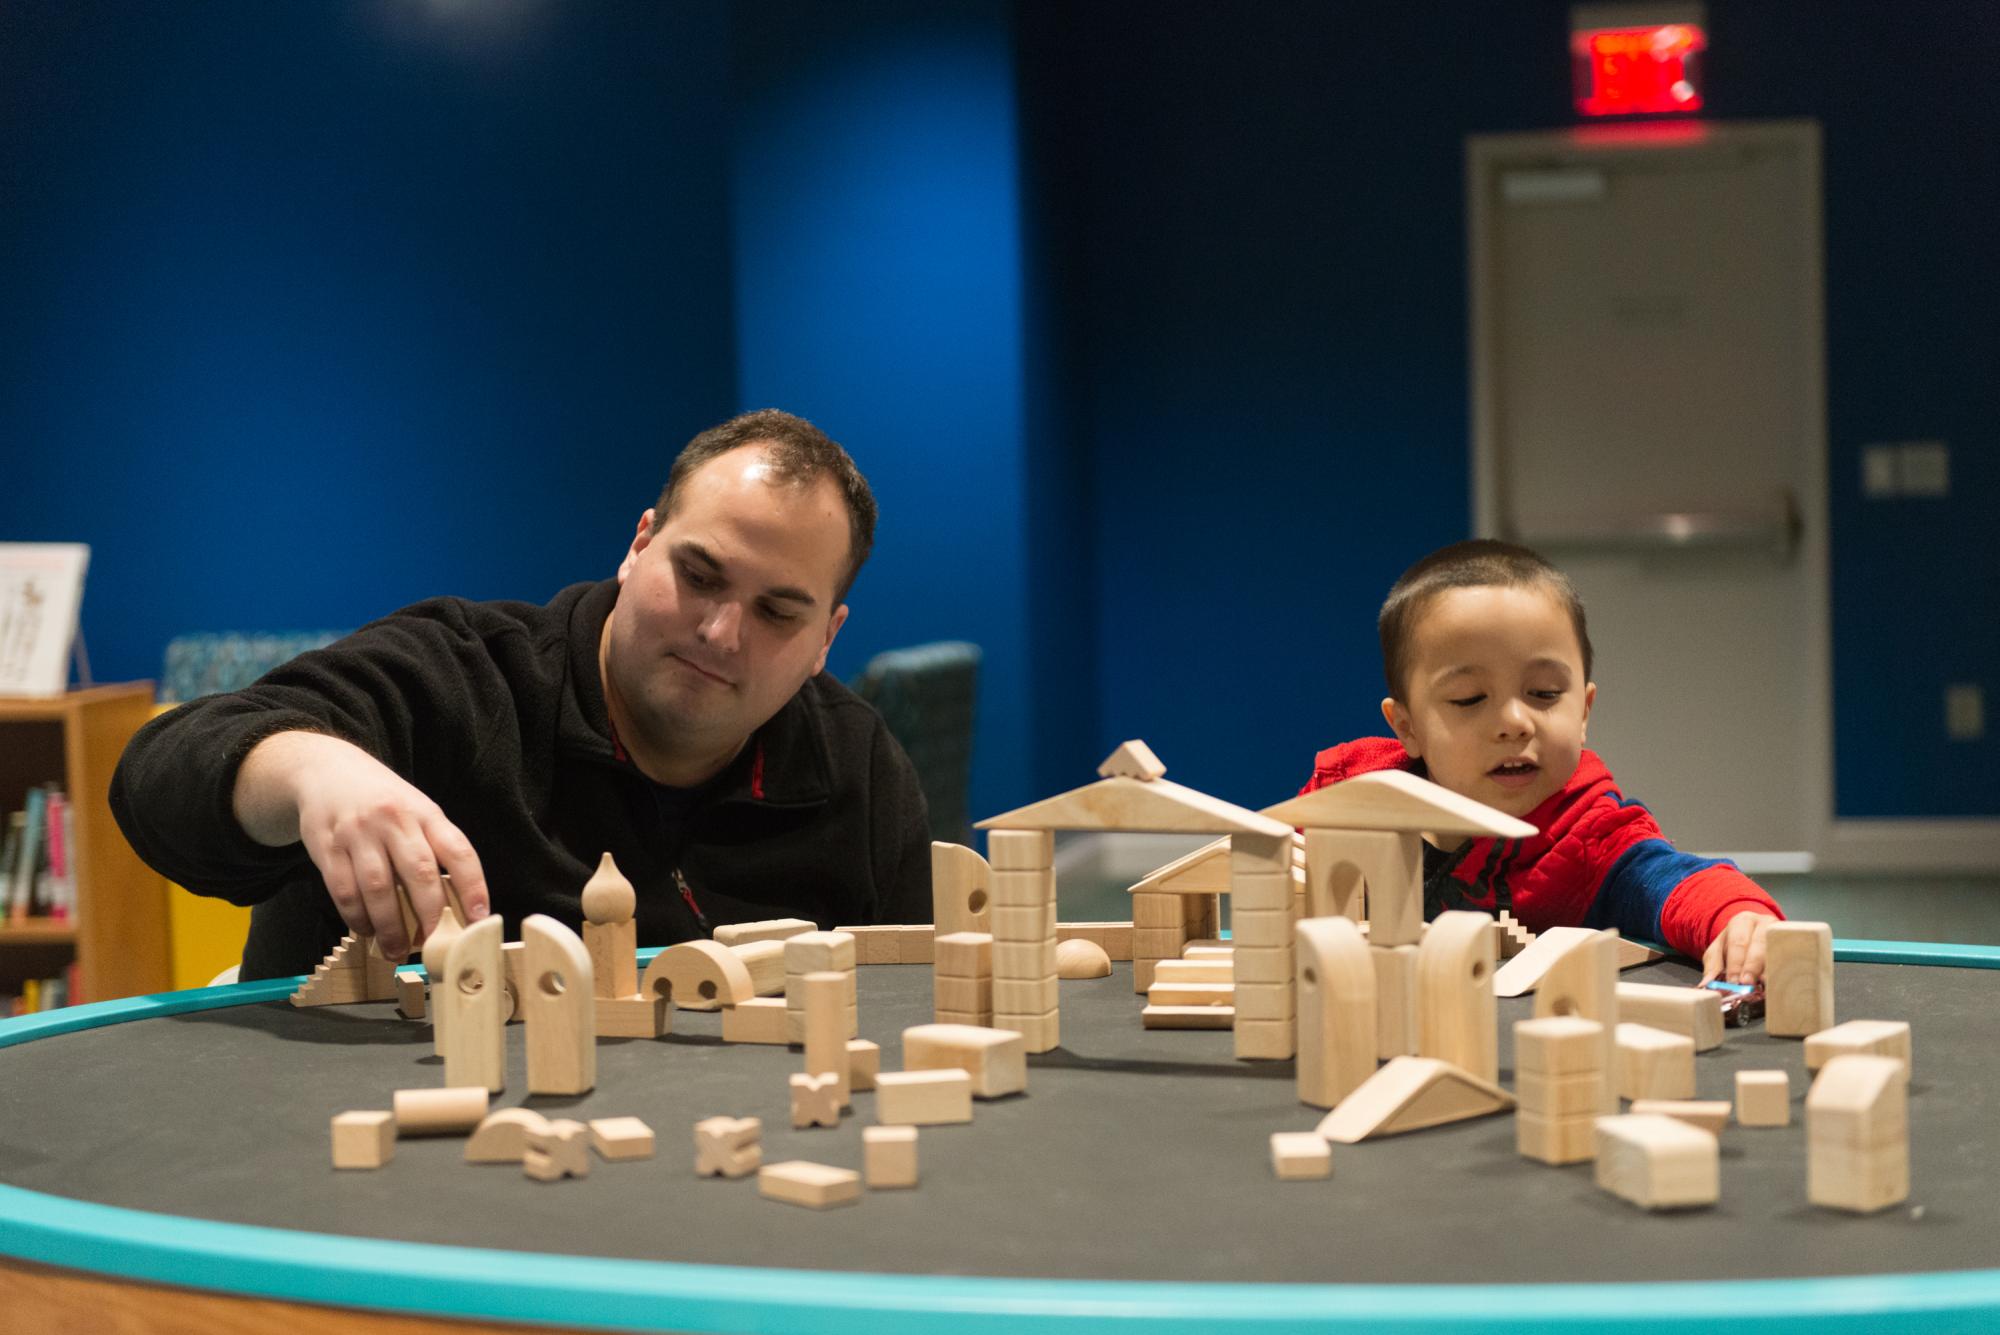 Father and son building together with wooden blocks